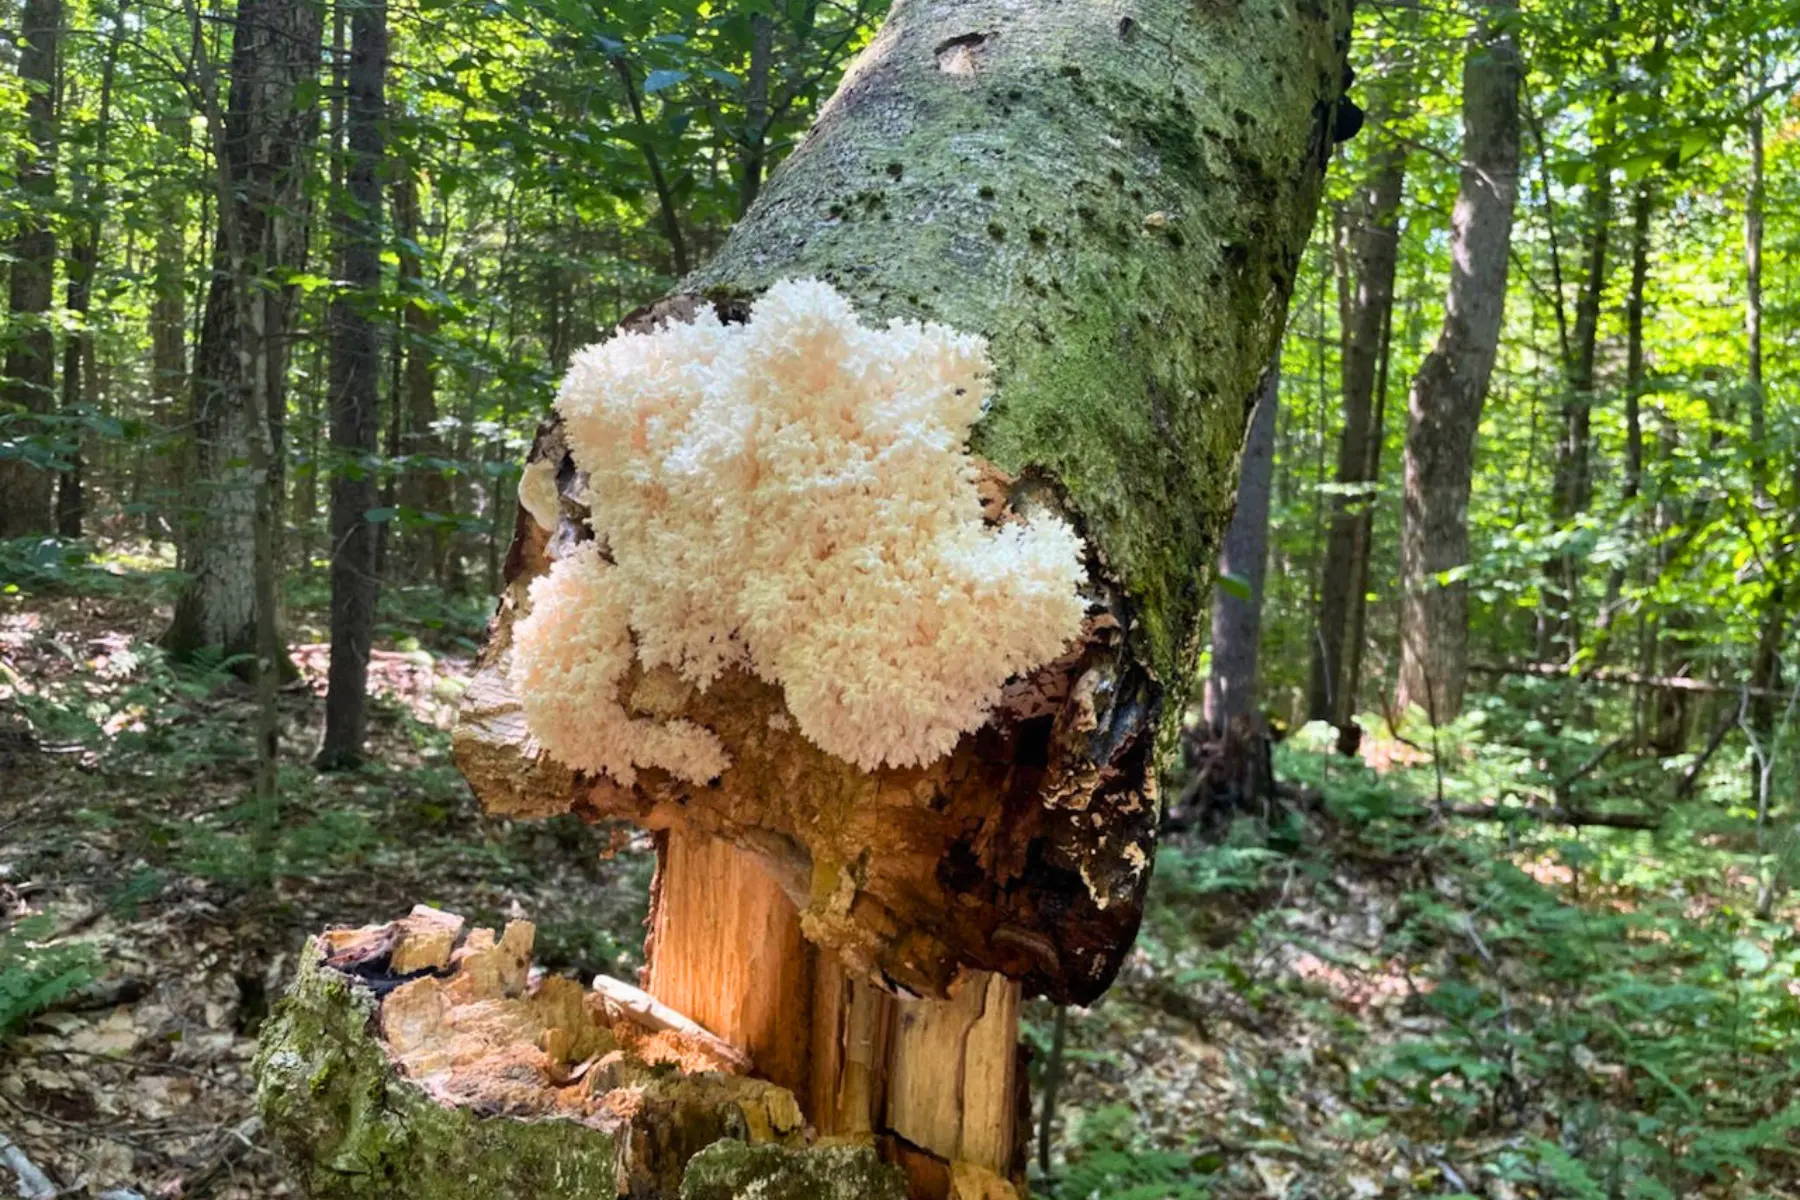 Lion's Mane mushroom growing in the wild forests of New York State. Hericium species.